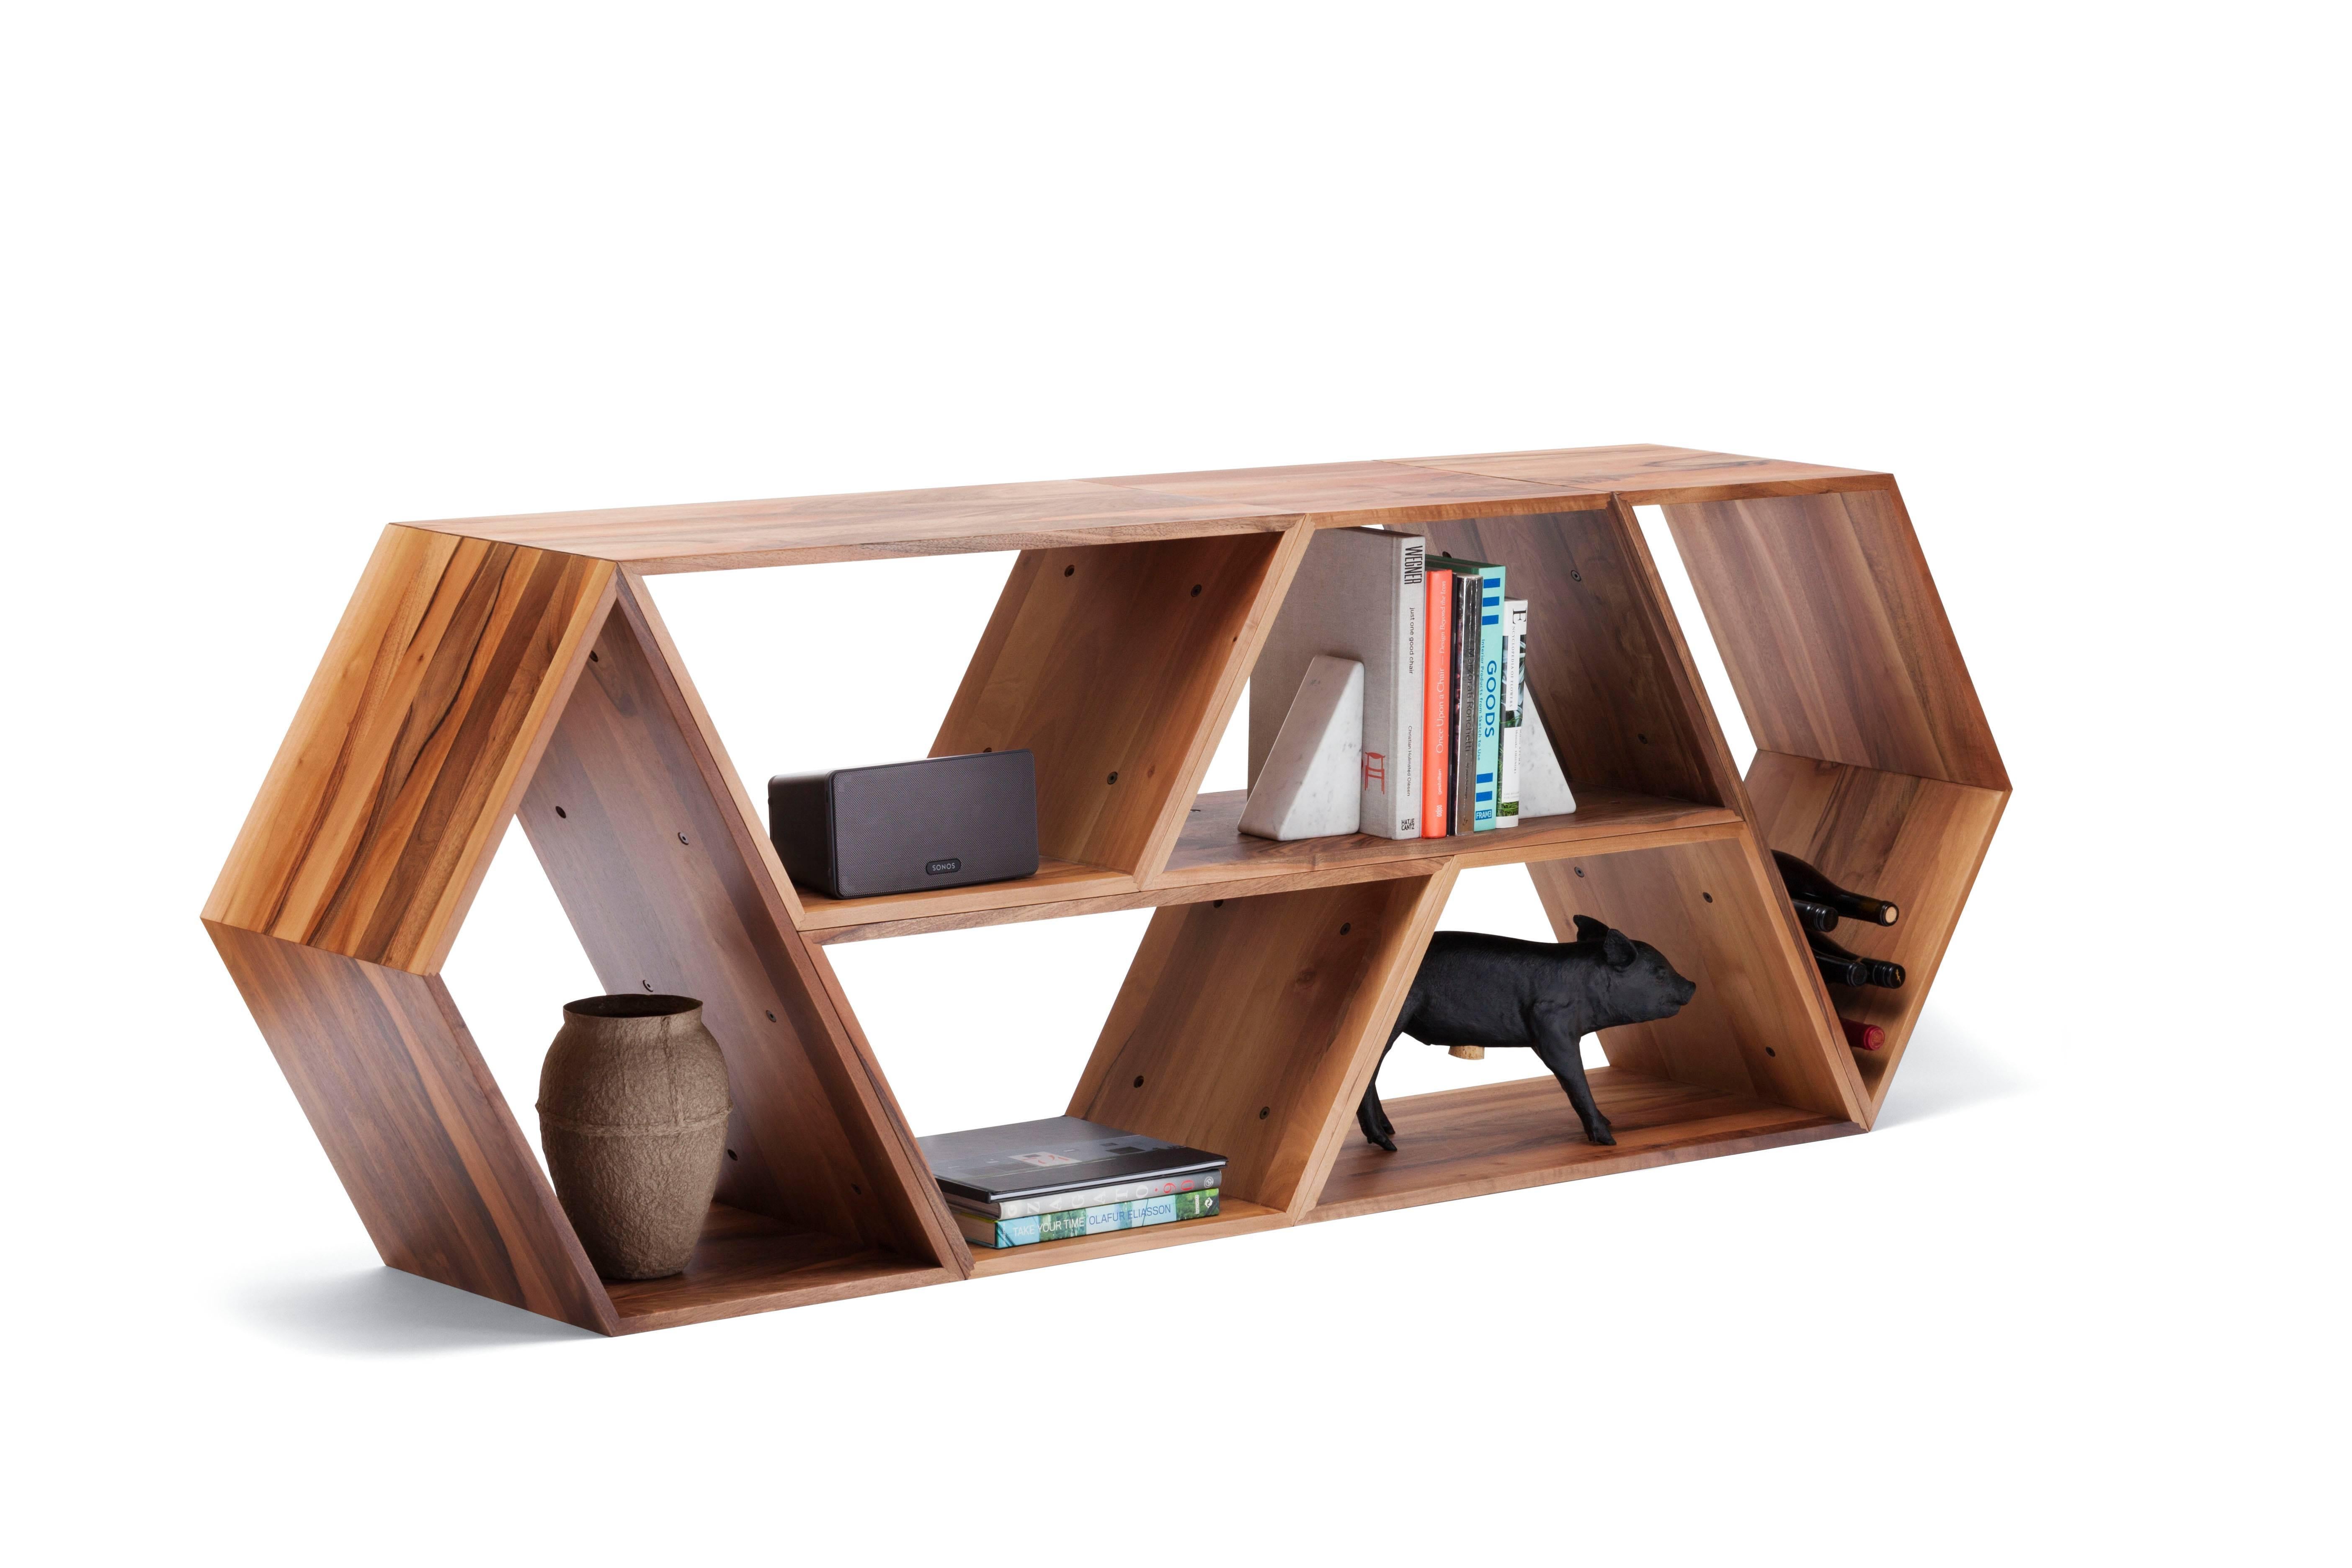 Tetra, Solid Oak Modular Contemporary Shelving Units, Made in Ratio For Sale 4